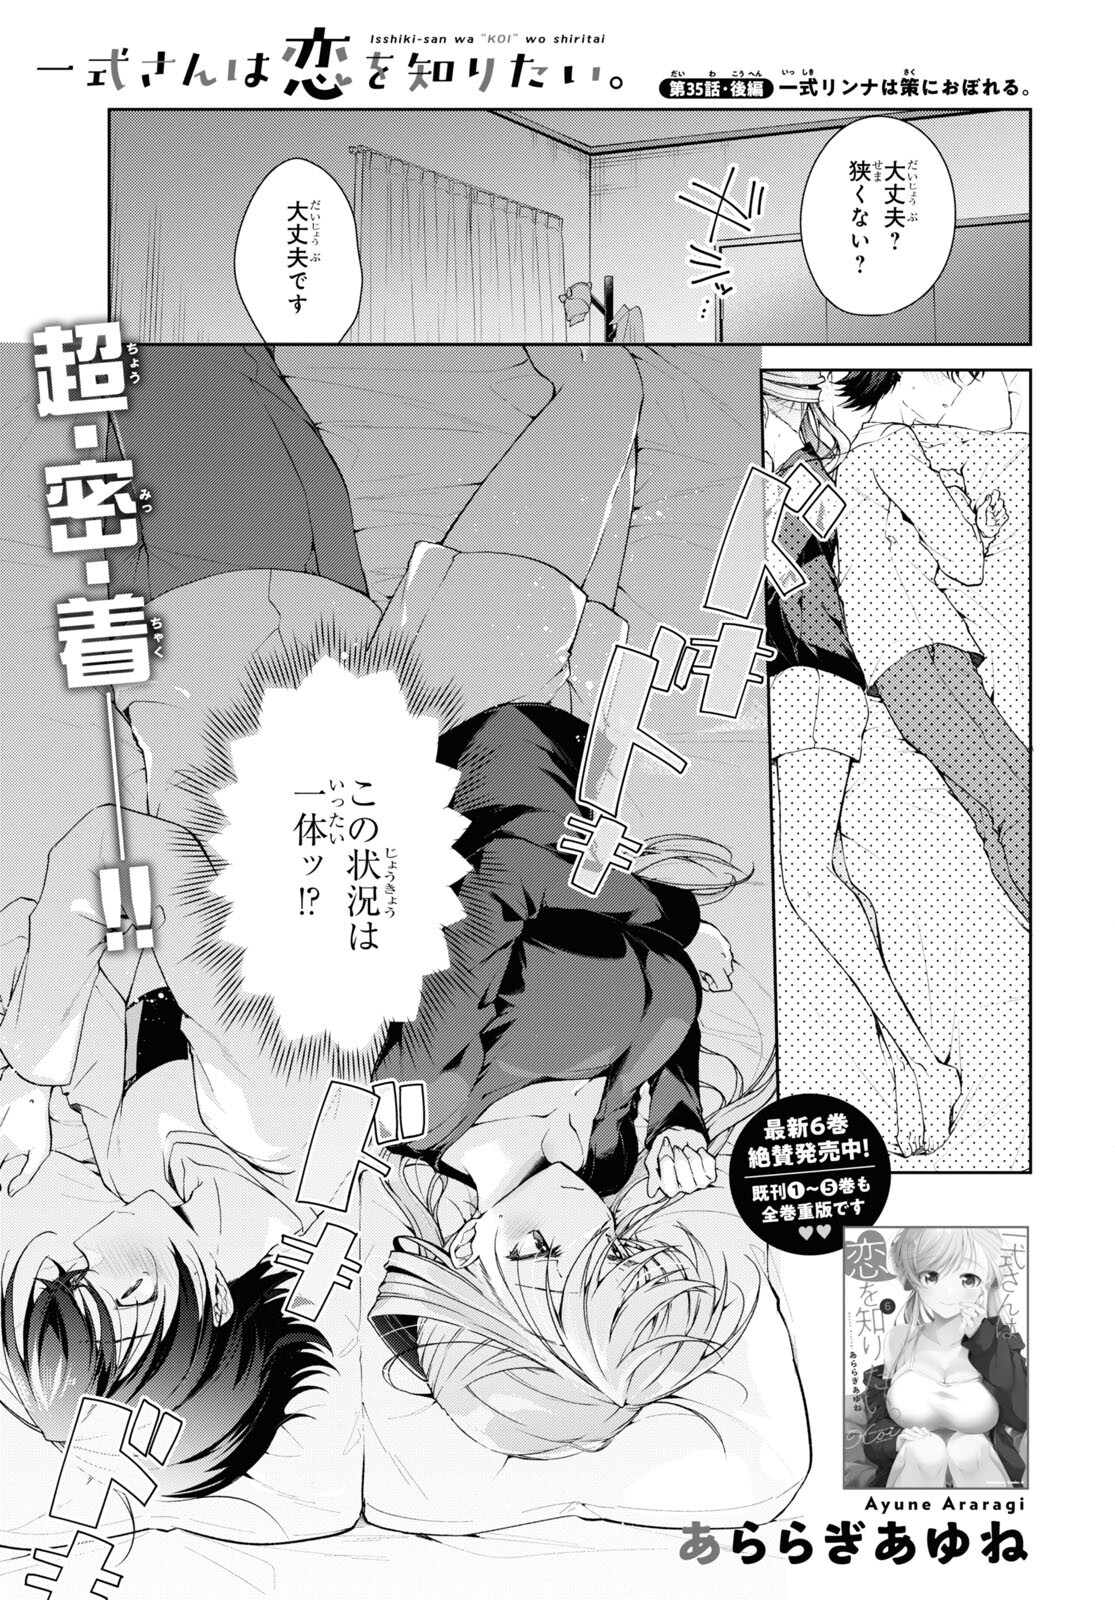 Fullmetal Rinna wants to XX - Chapter 35.2 - Page 1